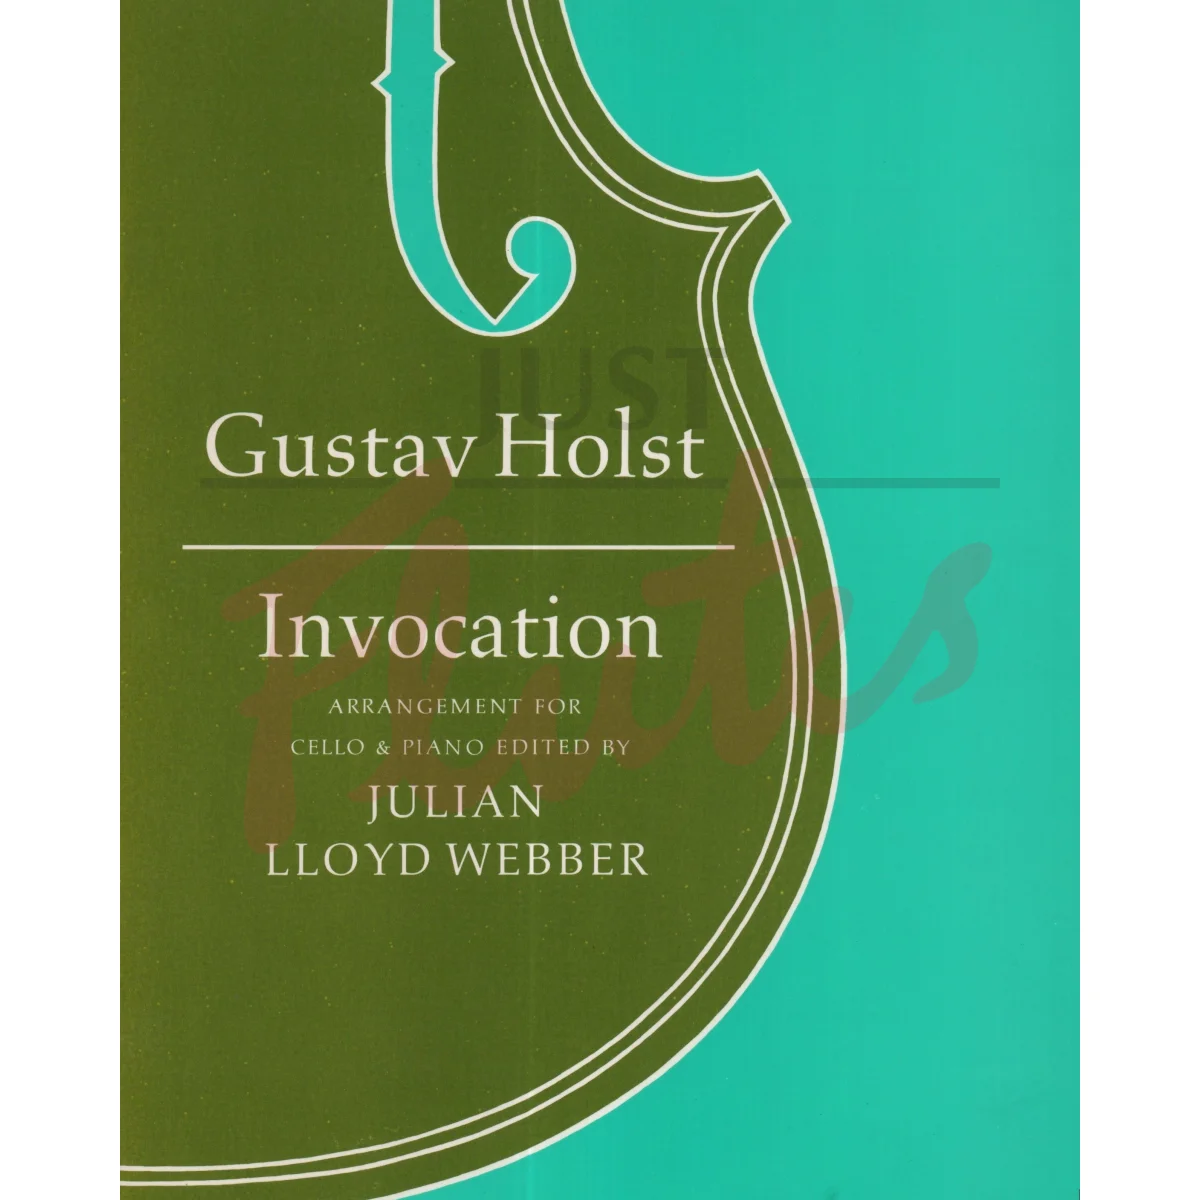 Invocation for Cello and Piano